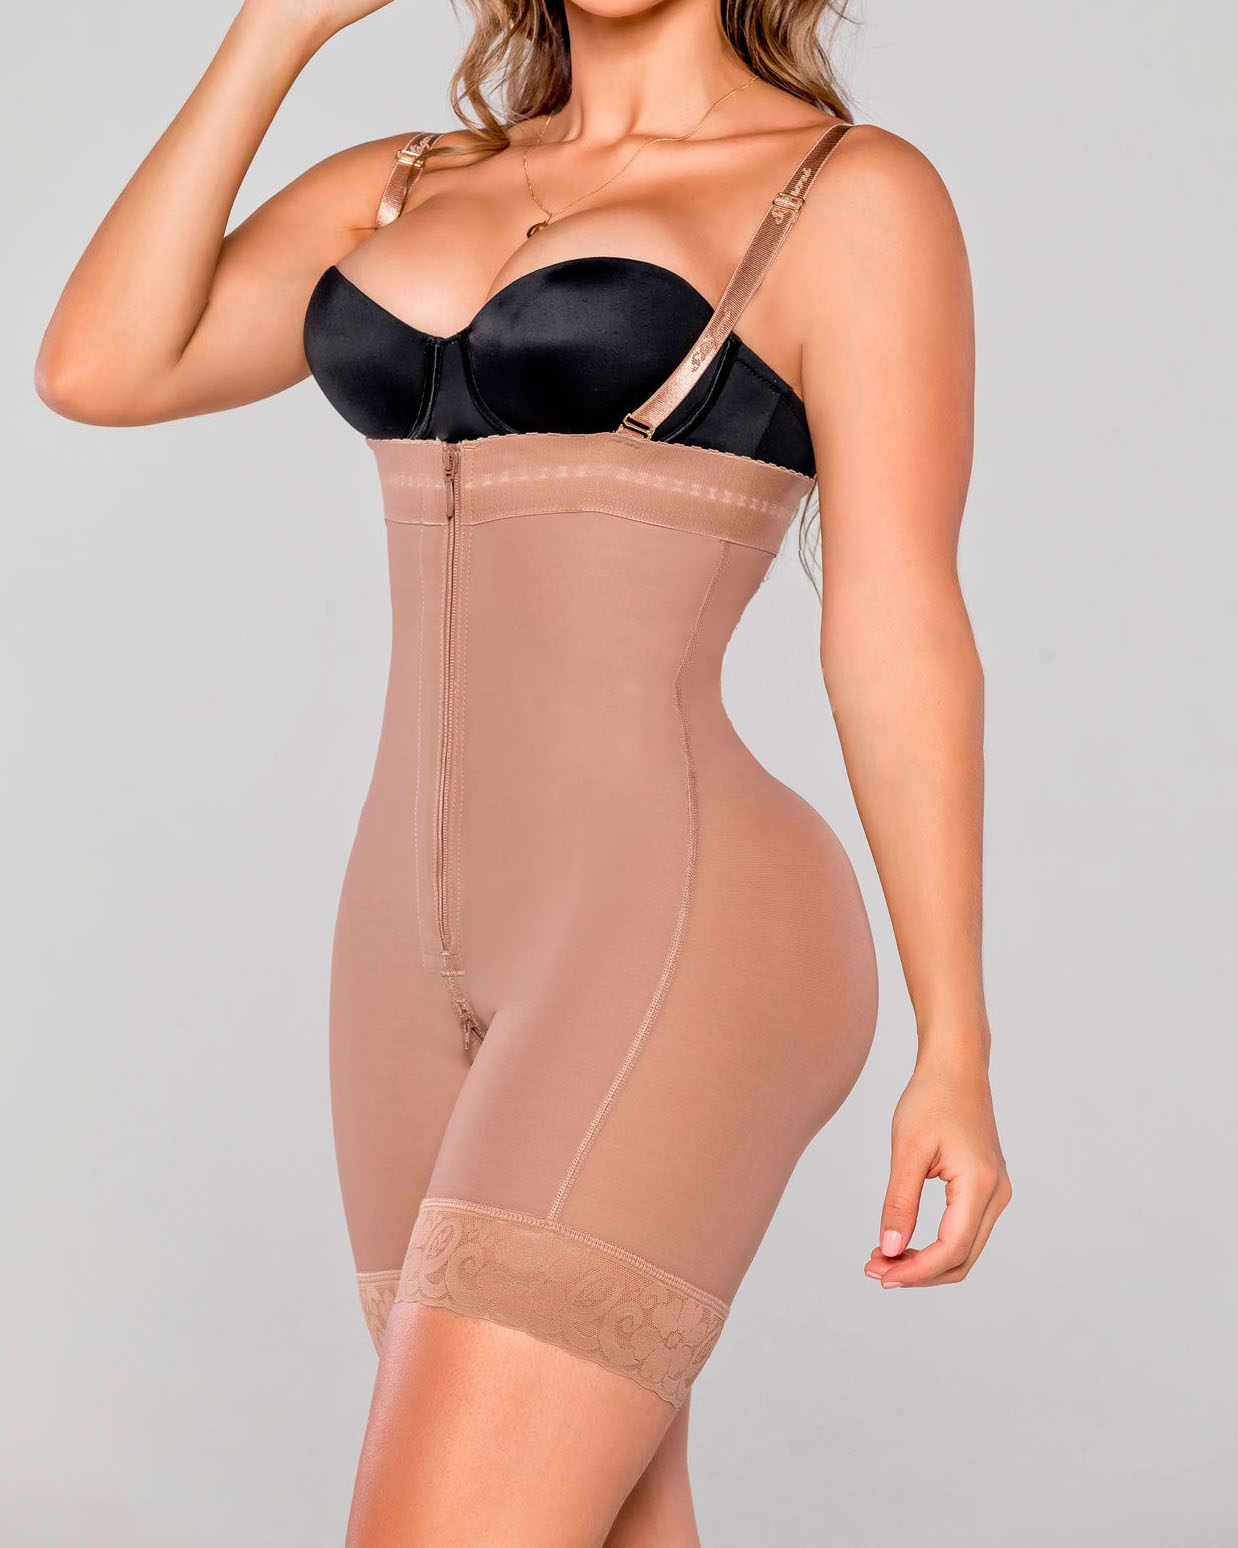 Check out this new #faja #waisttrainer I just got from chic-curve.com using  coupon code: Candace 